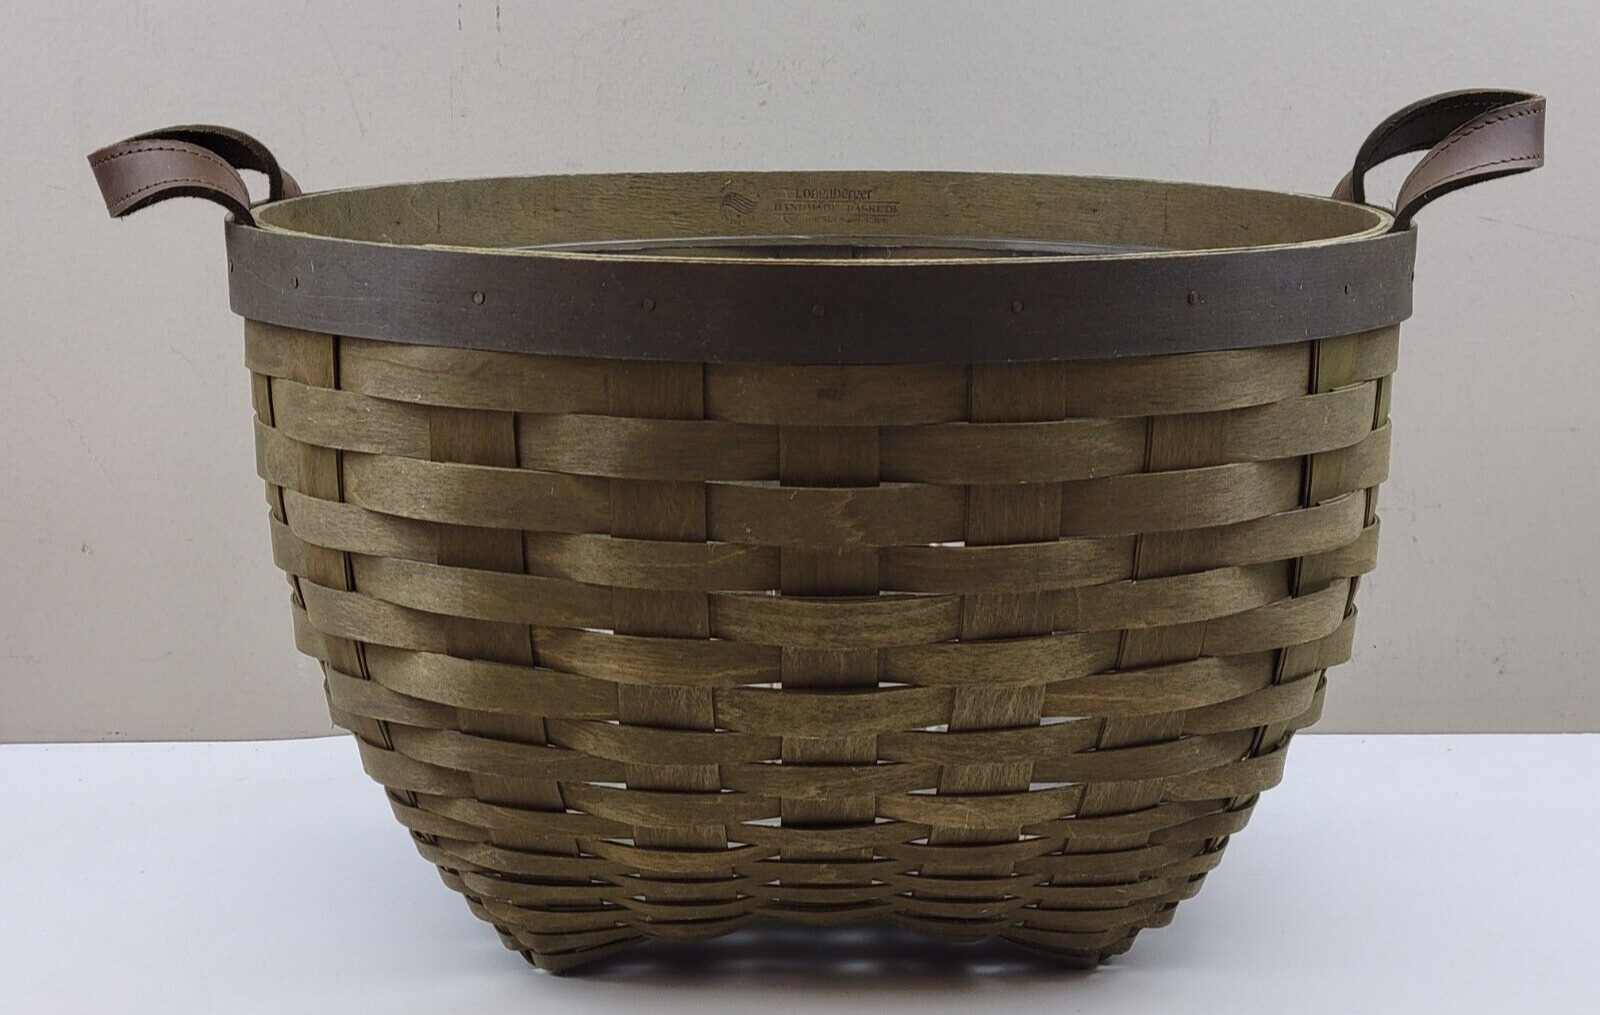 Longaberger 13-inch Wide American Craft Work Basket Olive Stained w/ Protector